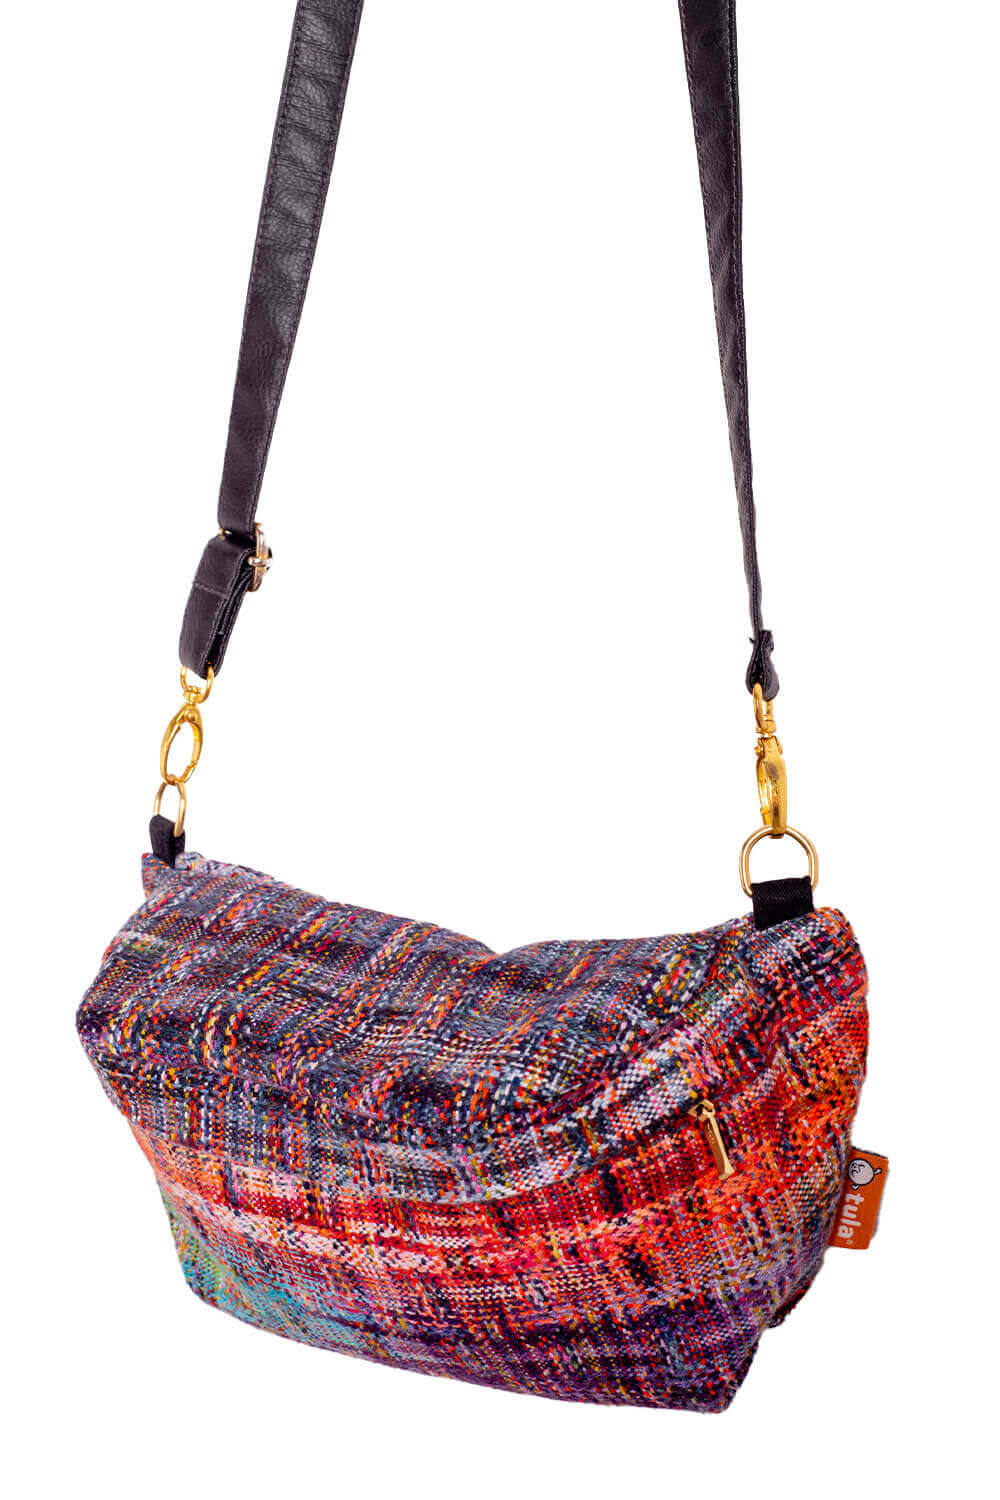 The Prism - Signature Handwoven Hip Pouch